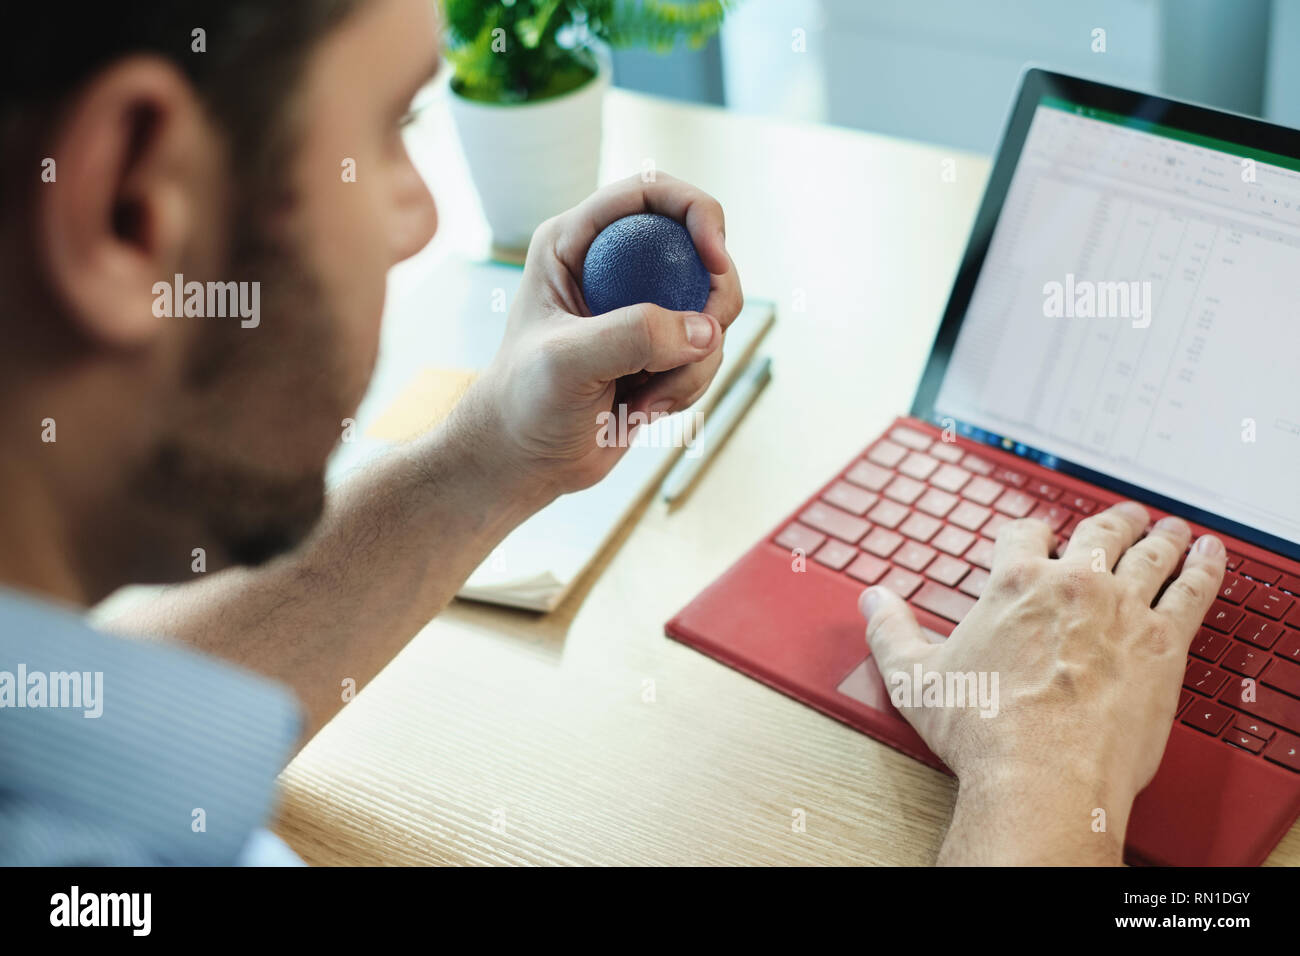 Adult Business Man Under Stress Pressure In Office Using Laptop Stock Photo